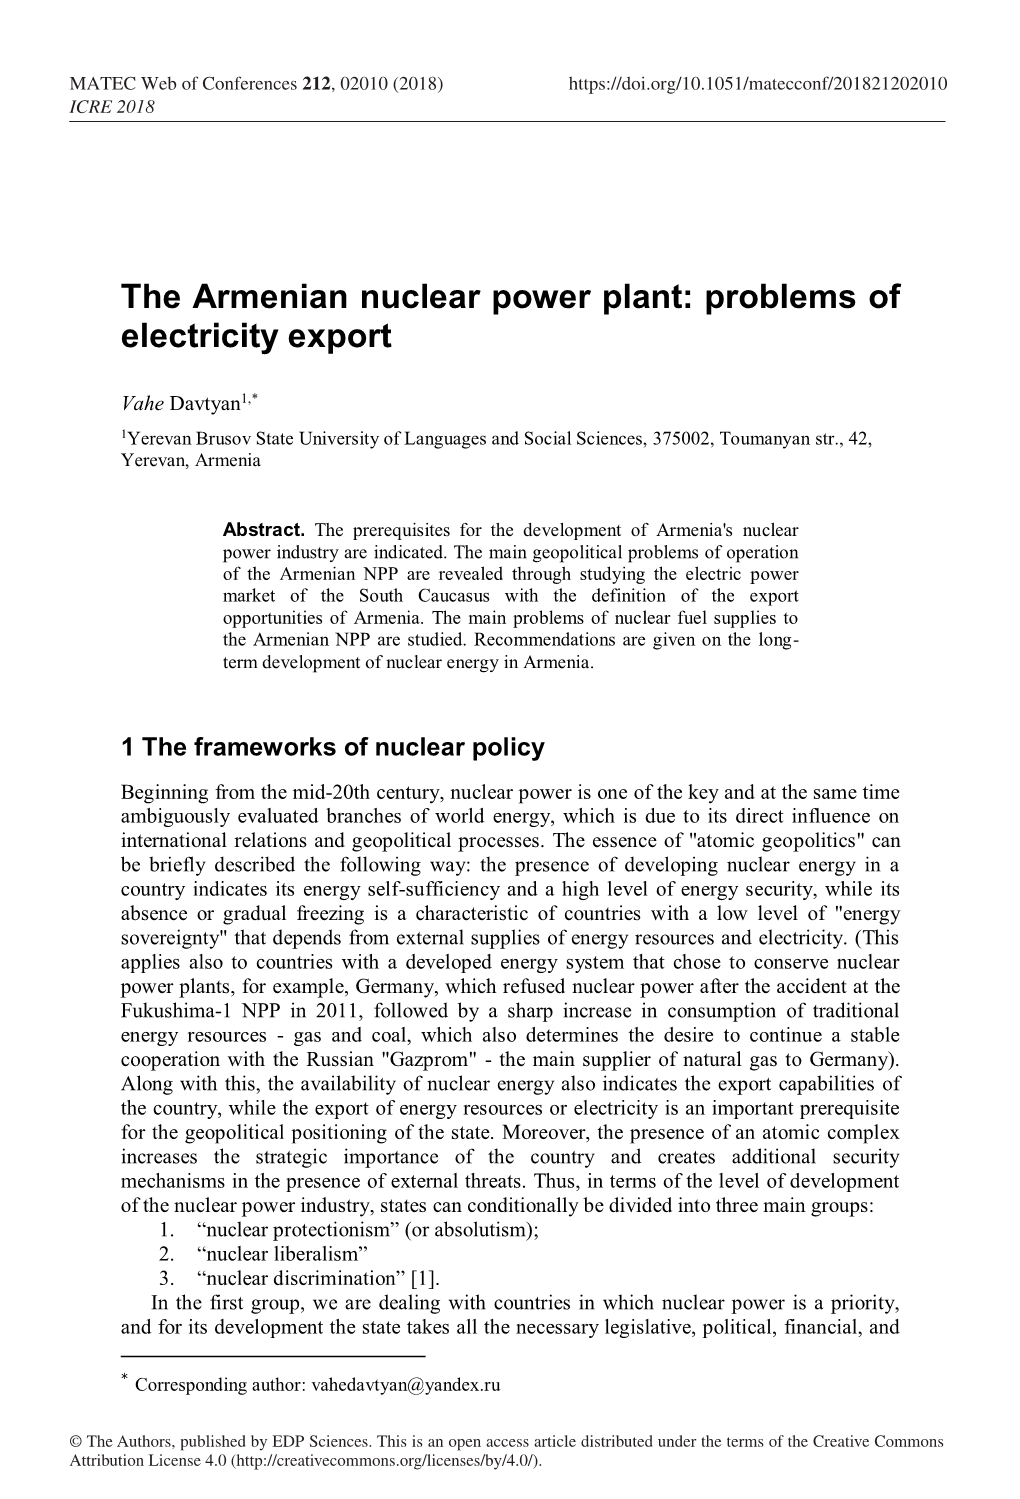 The Armenian Nuclear Power Plant: Problems of Electricity Export